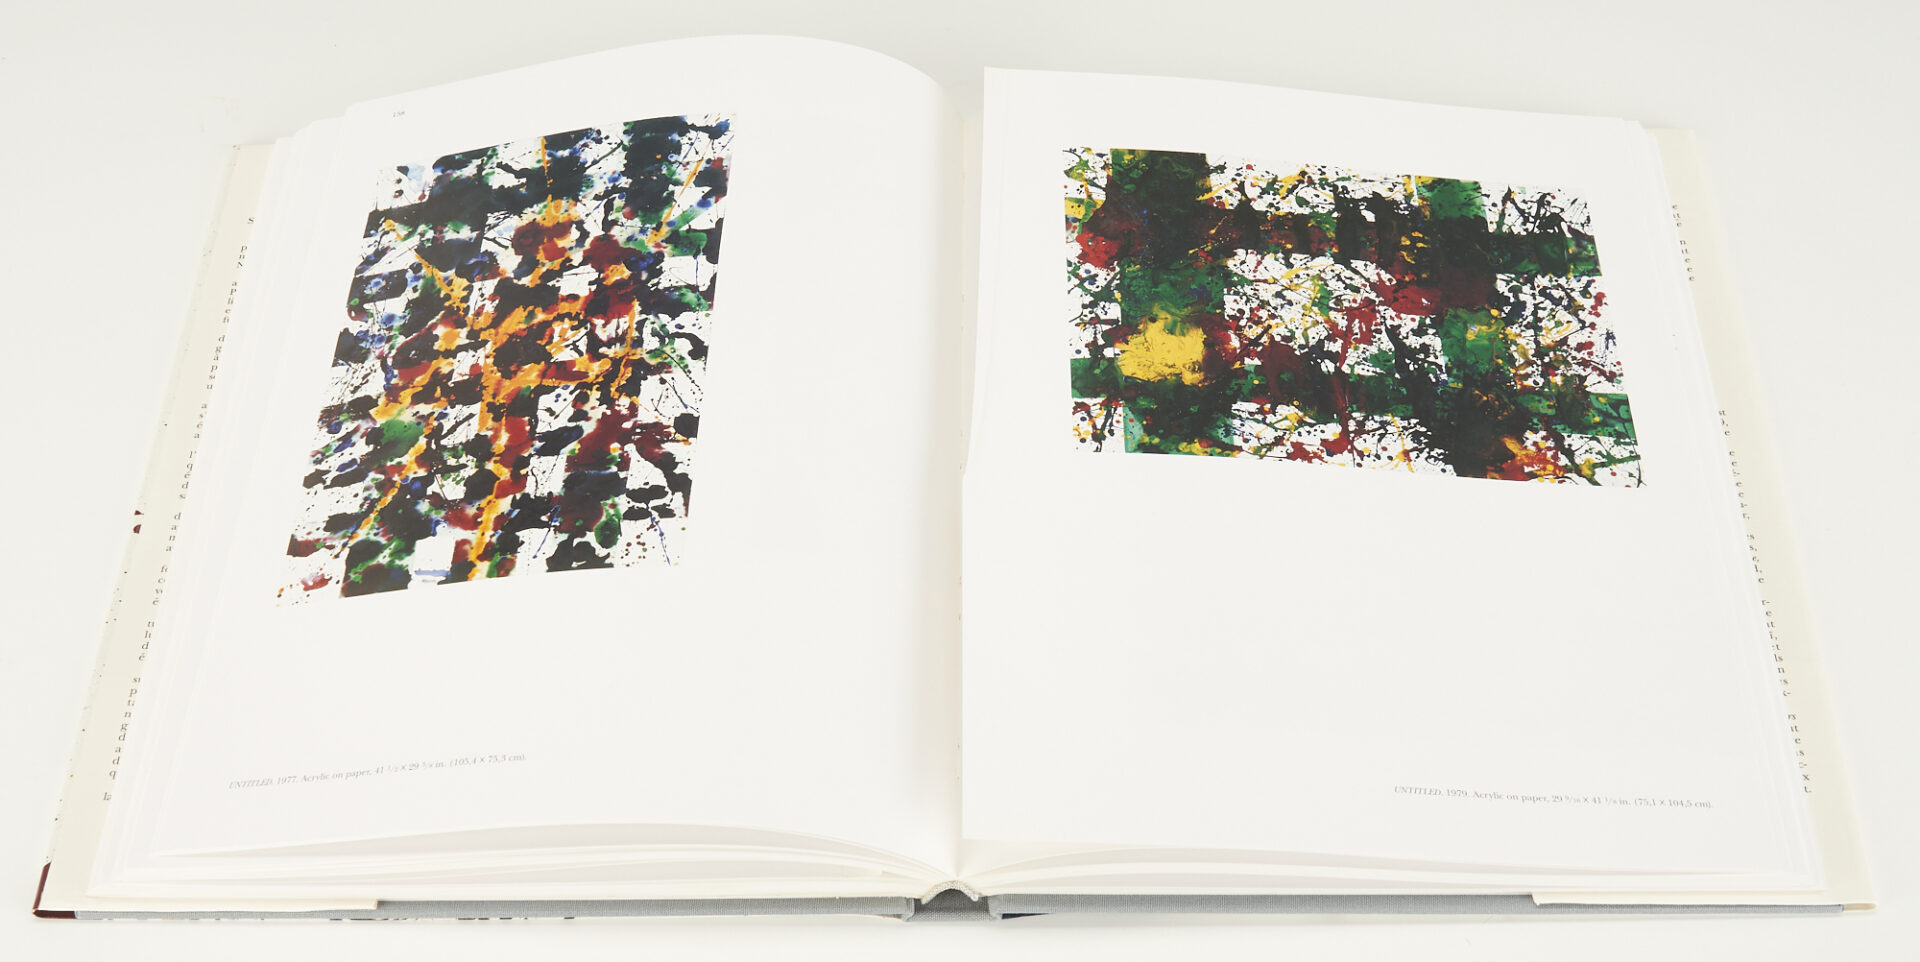 Lot 468: Sam Francis, Miniature Abstract Painting plus Book w/ Lithograph